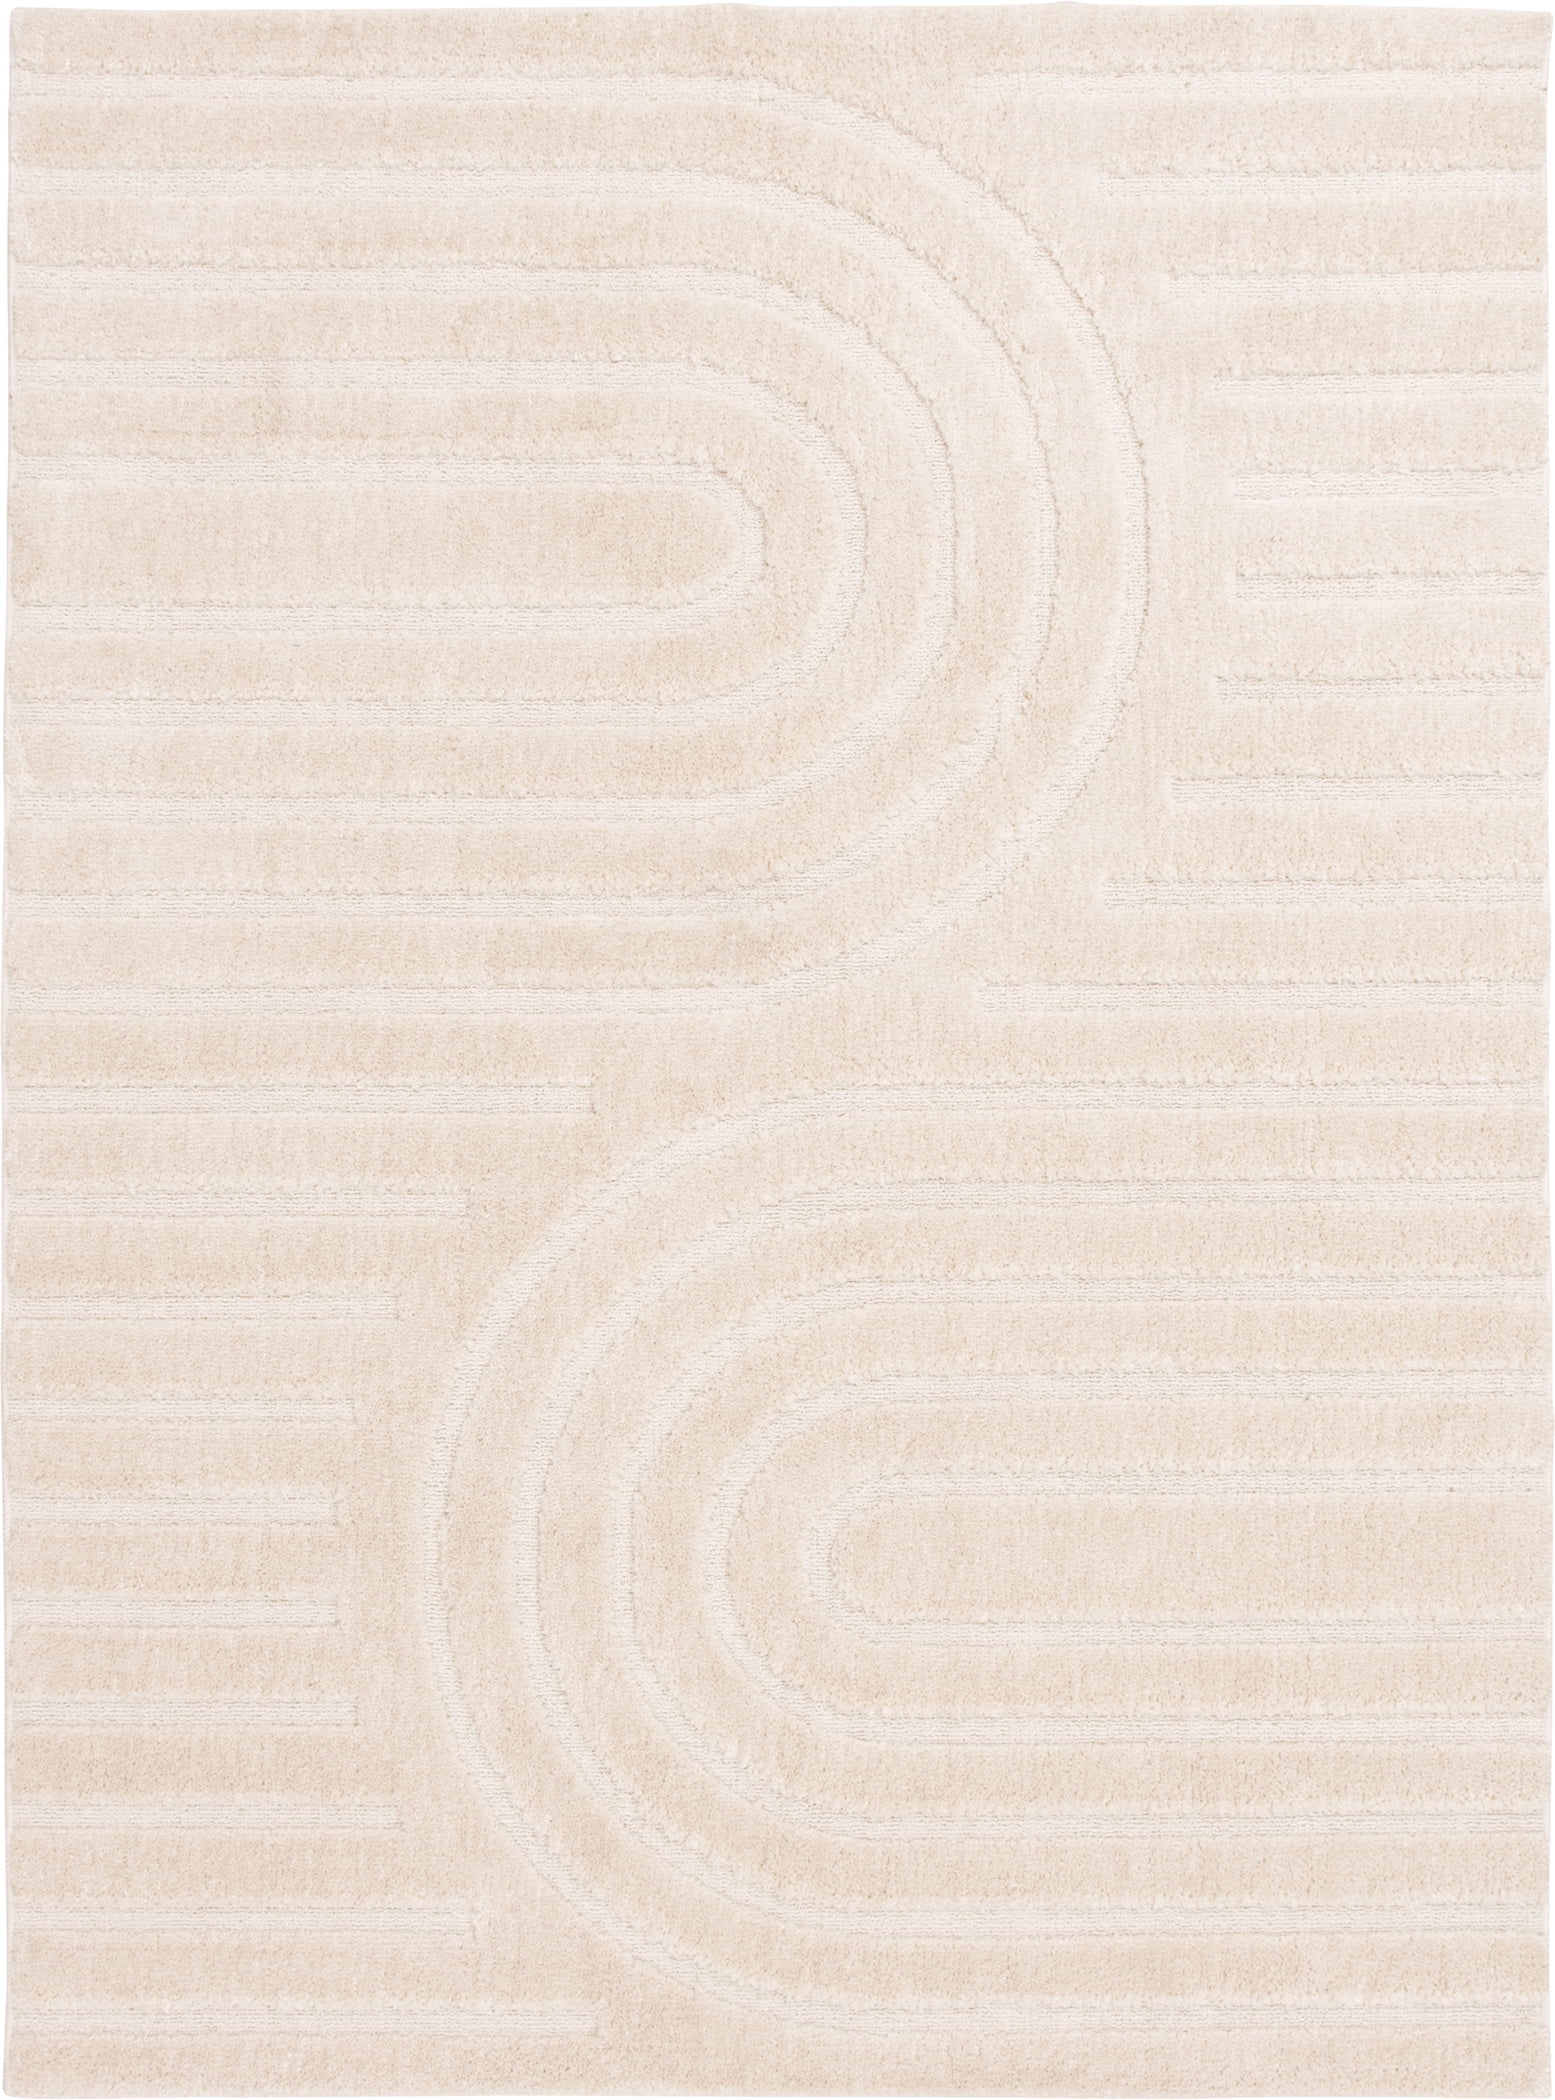 Better Homes & Gardens Arches Hi Low Area Rug, Ivory, 5'x7'